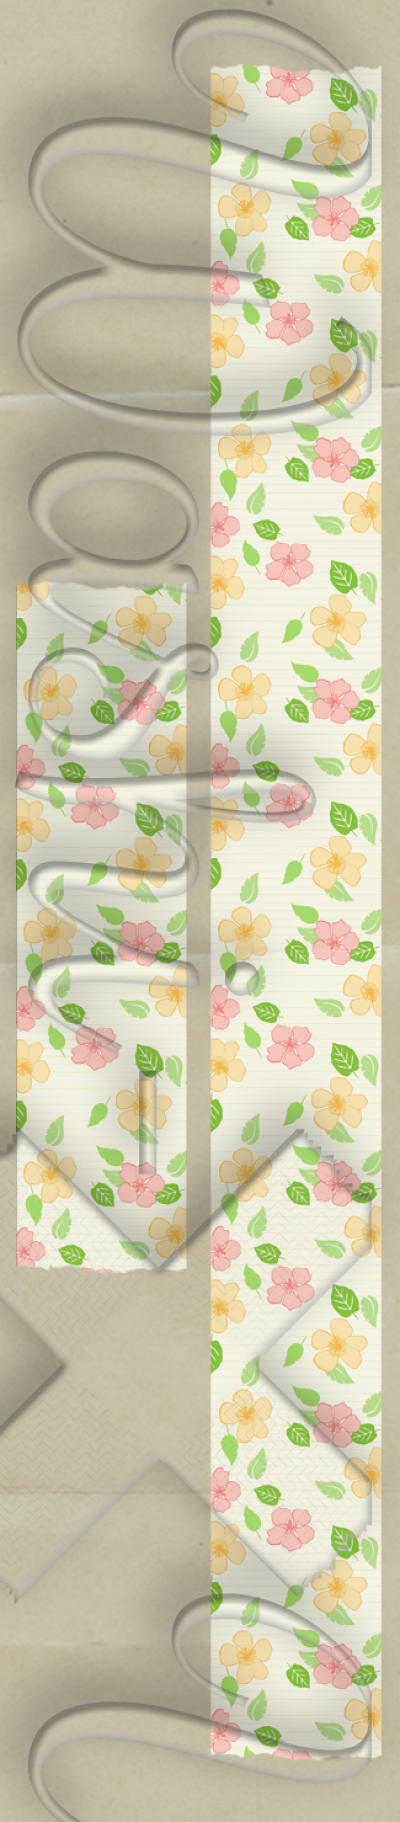 Green flowers patterned washi tape